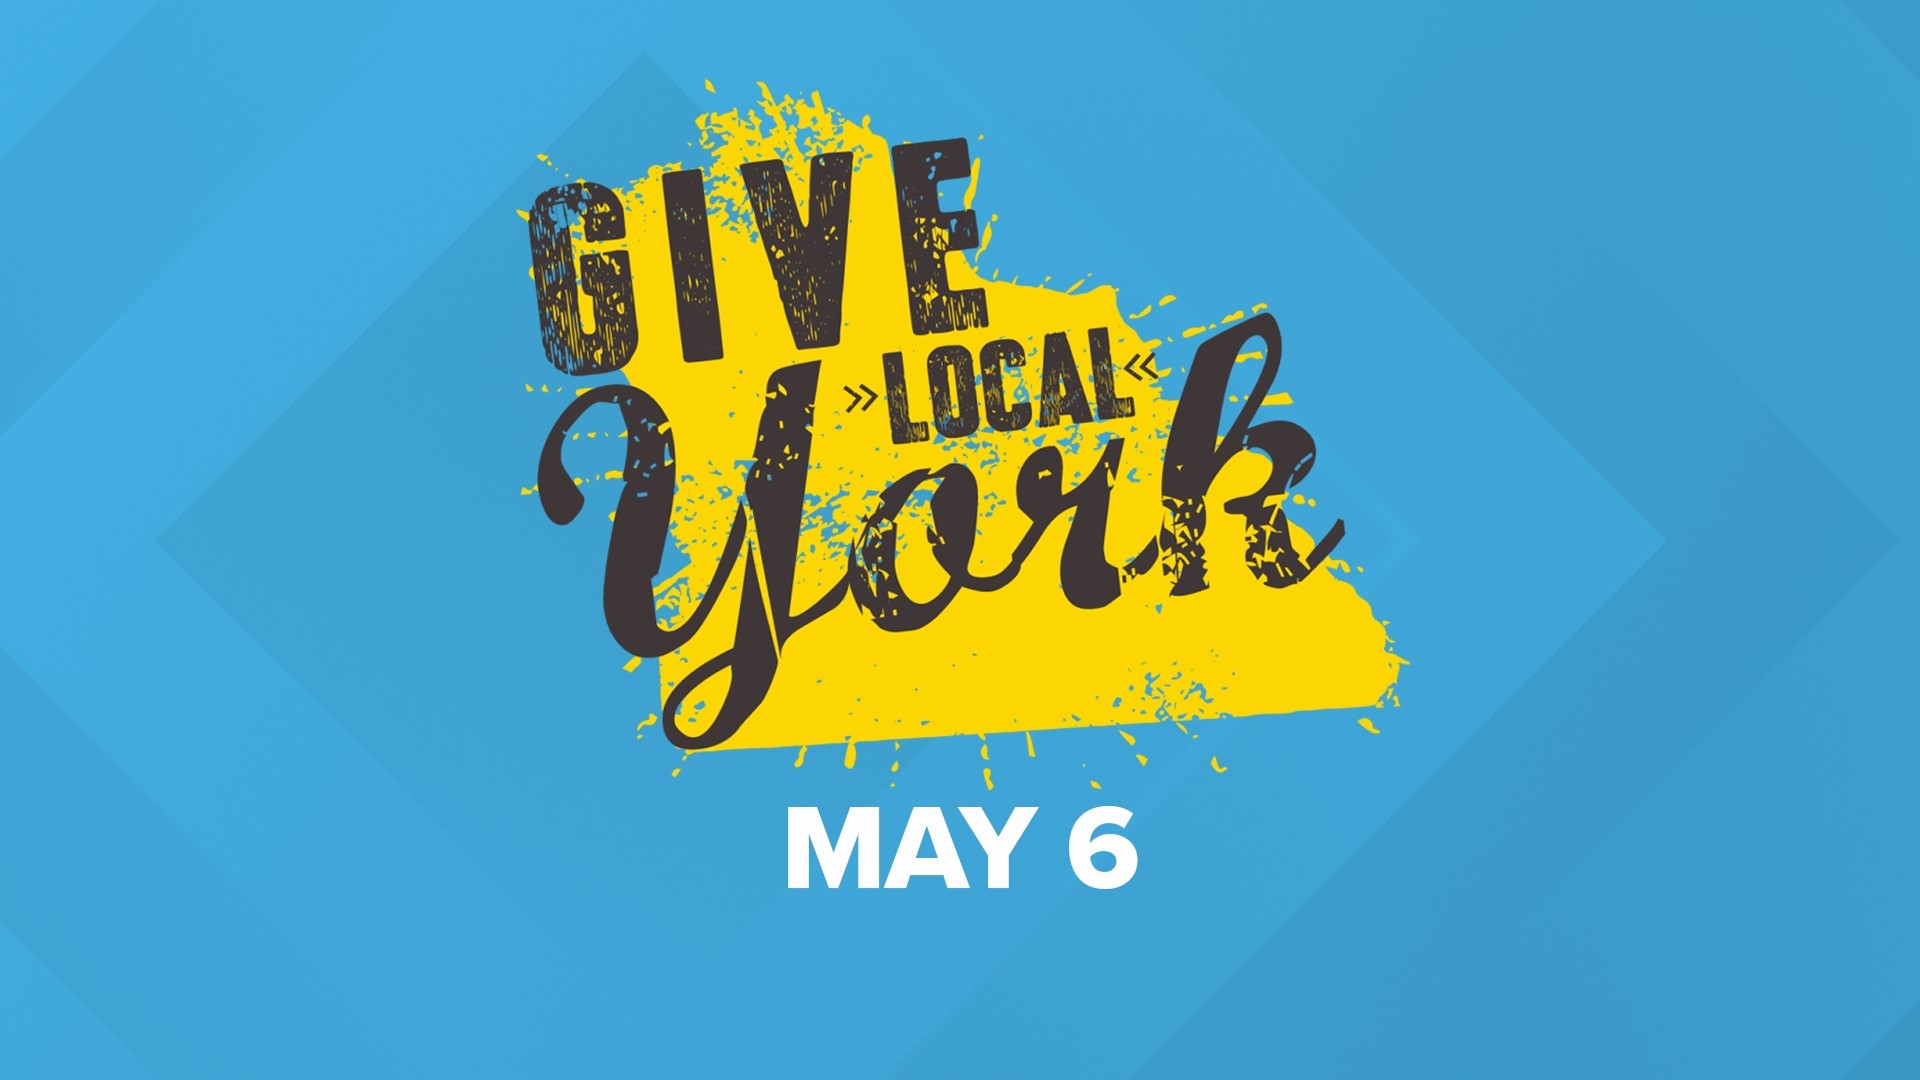 Tomorrow, from 12 a.m. to 11:59 p.m., donors can support local nonprofits in and around York County.